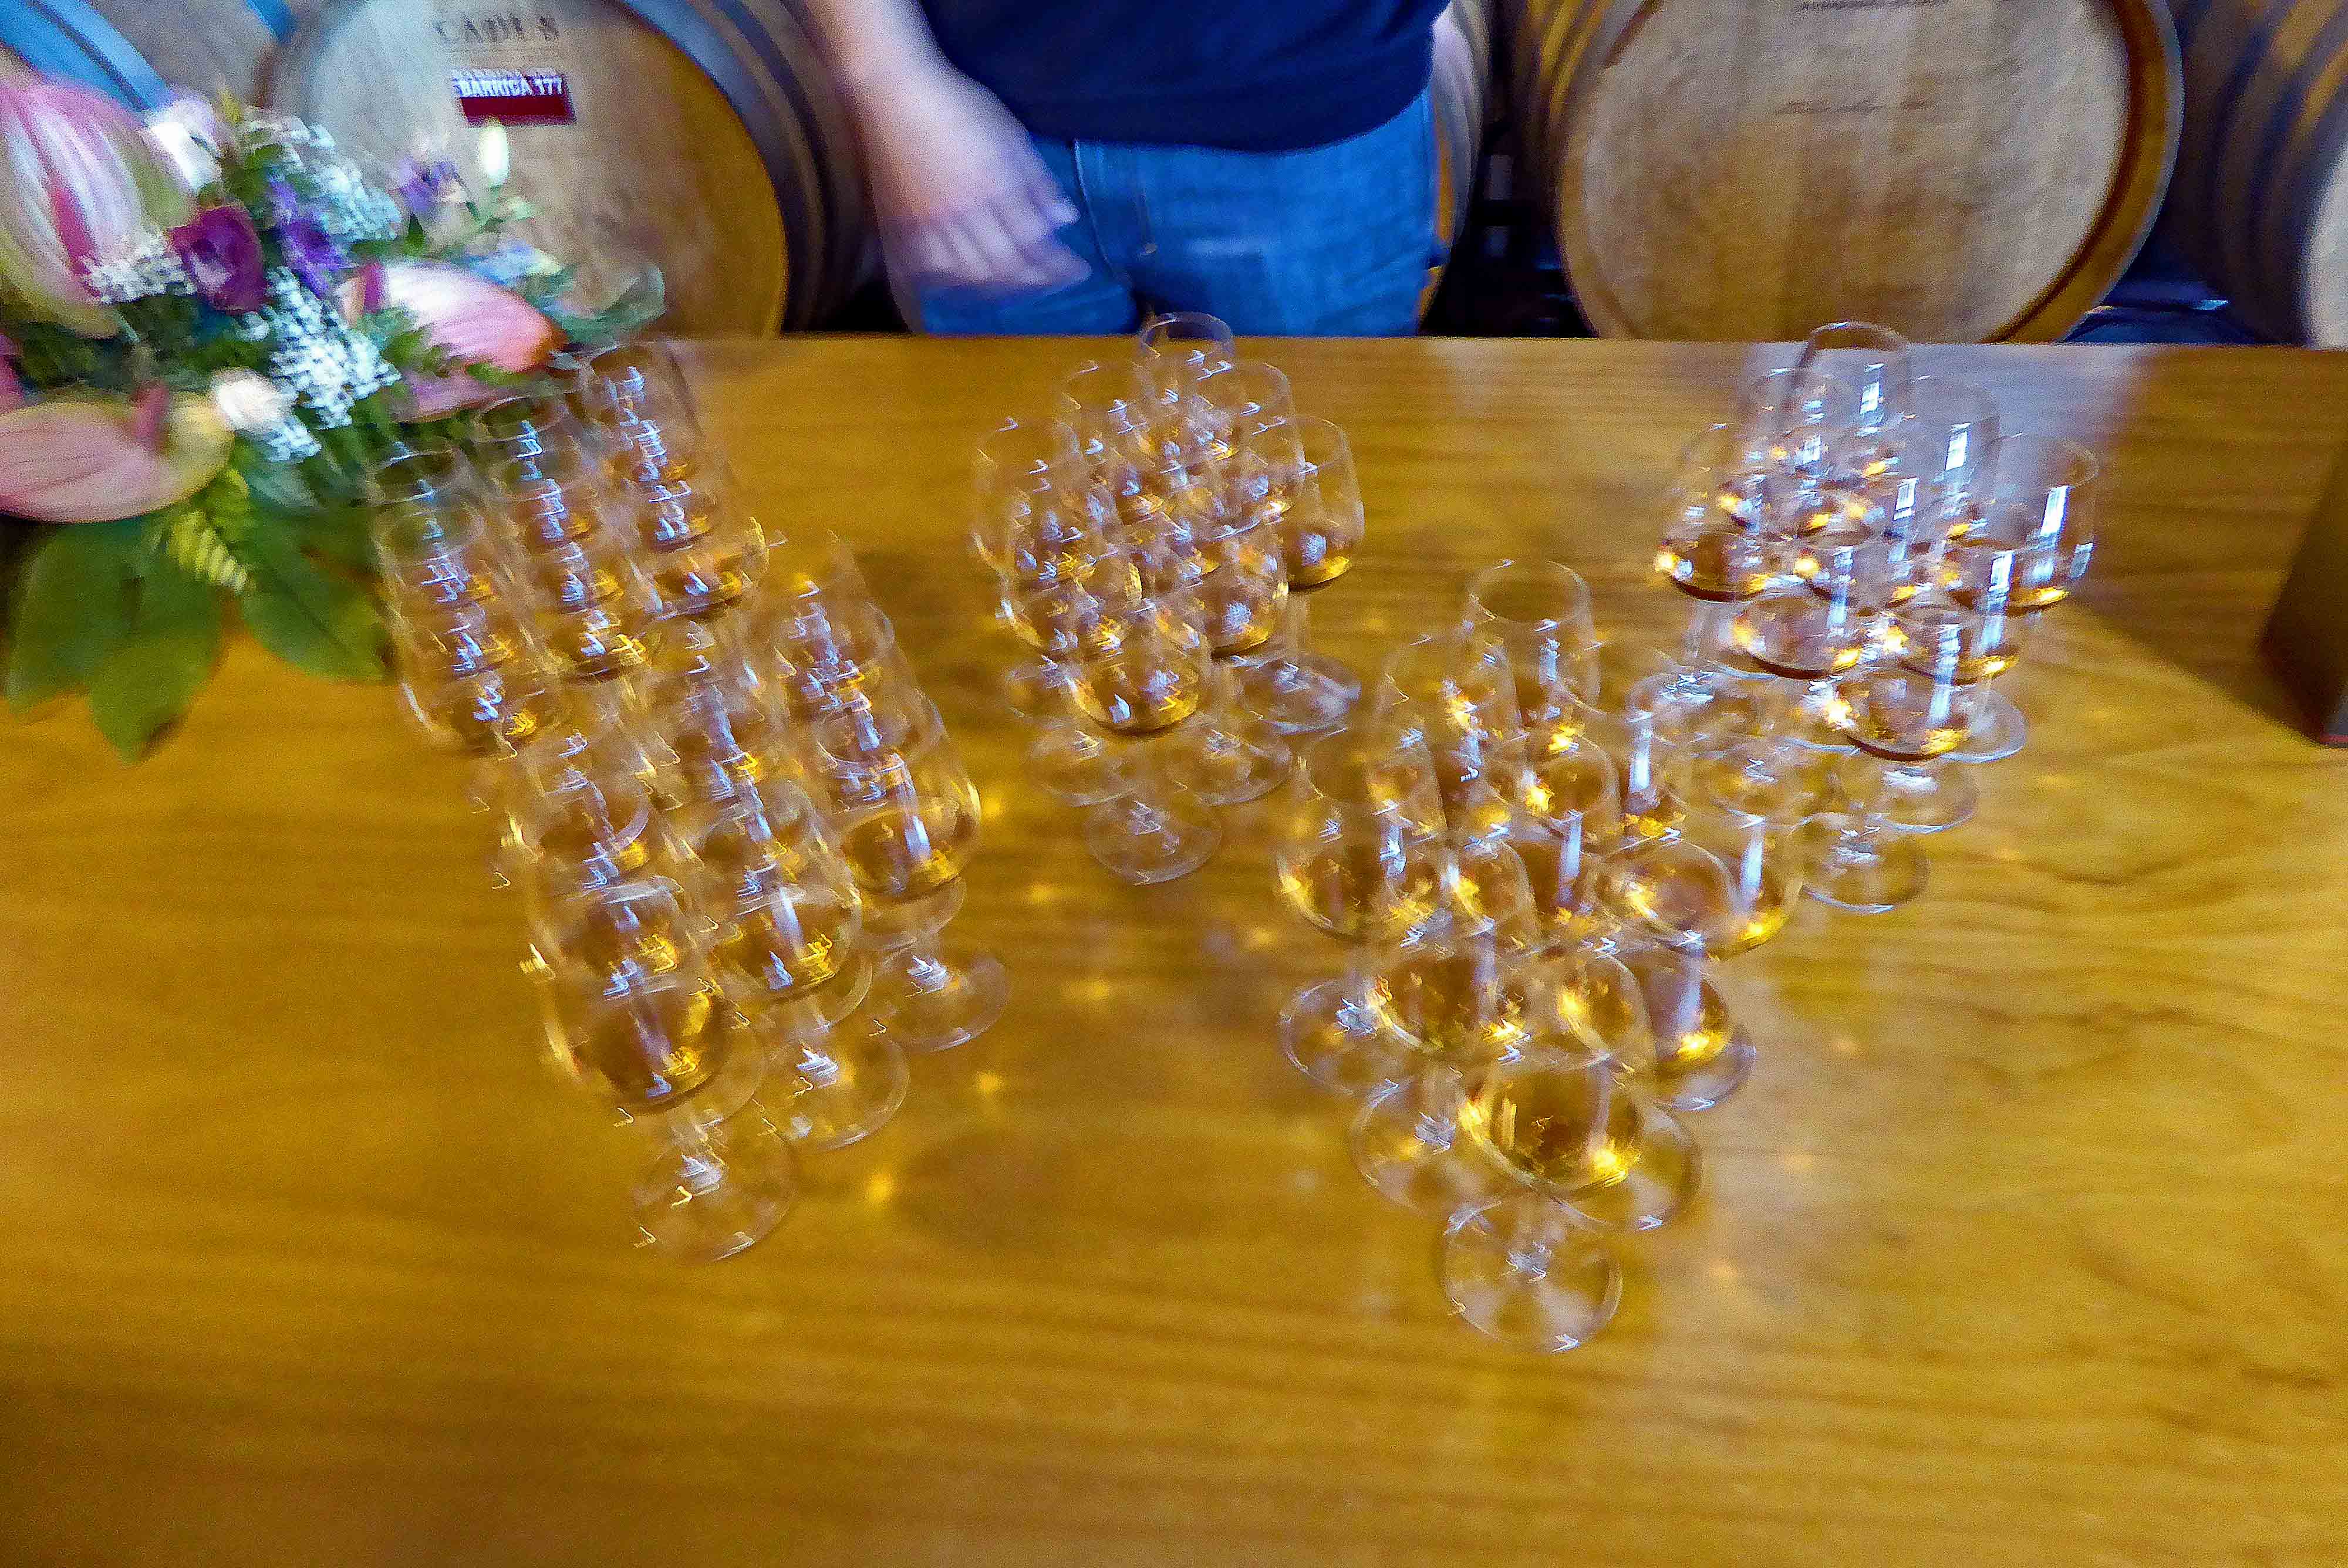 Tasting Moscatel Wine in Favaios, Portugal